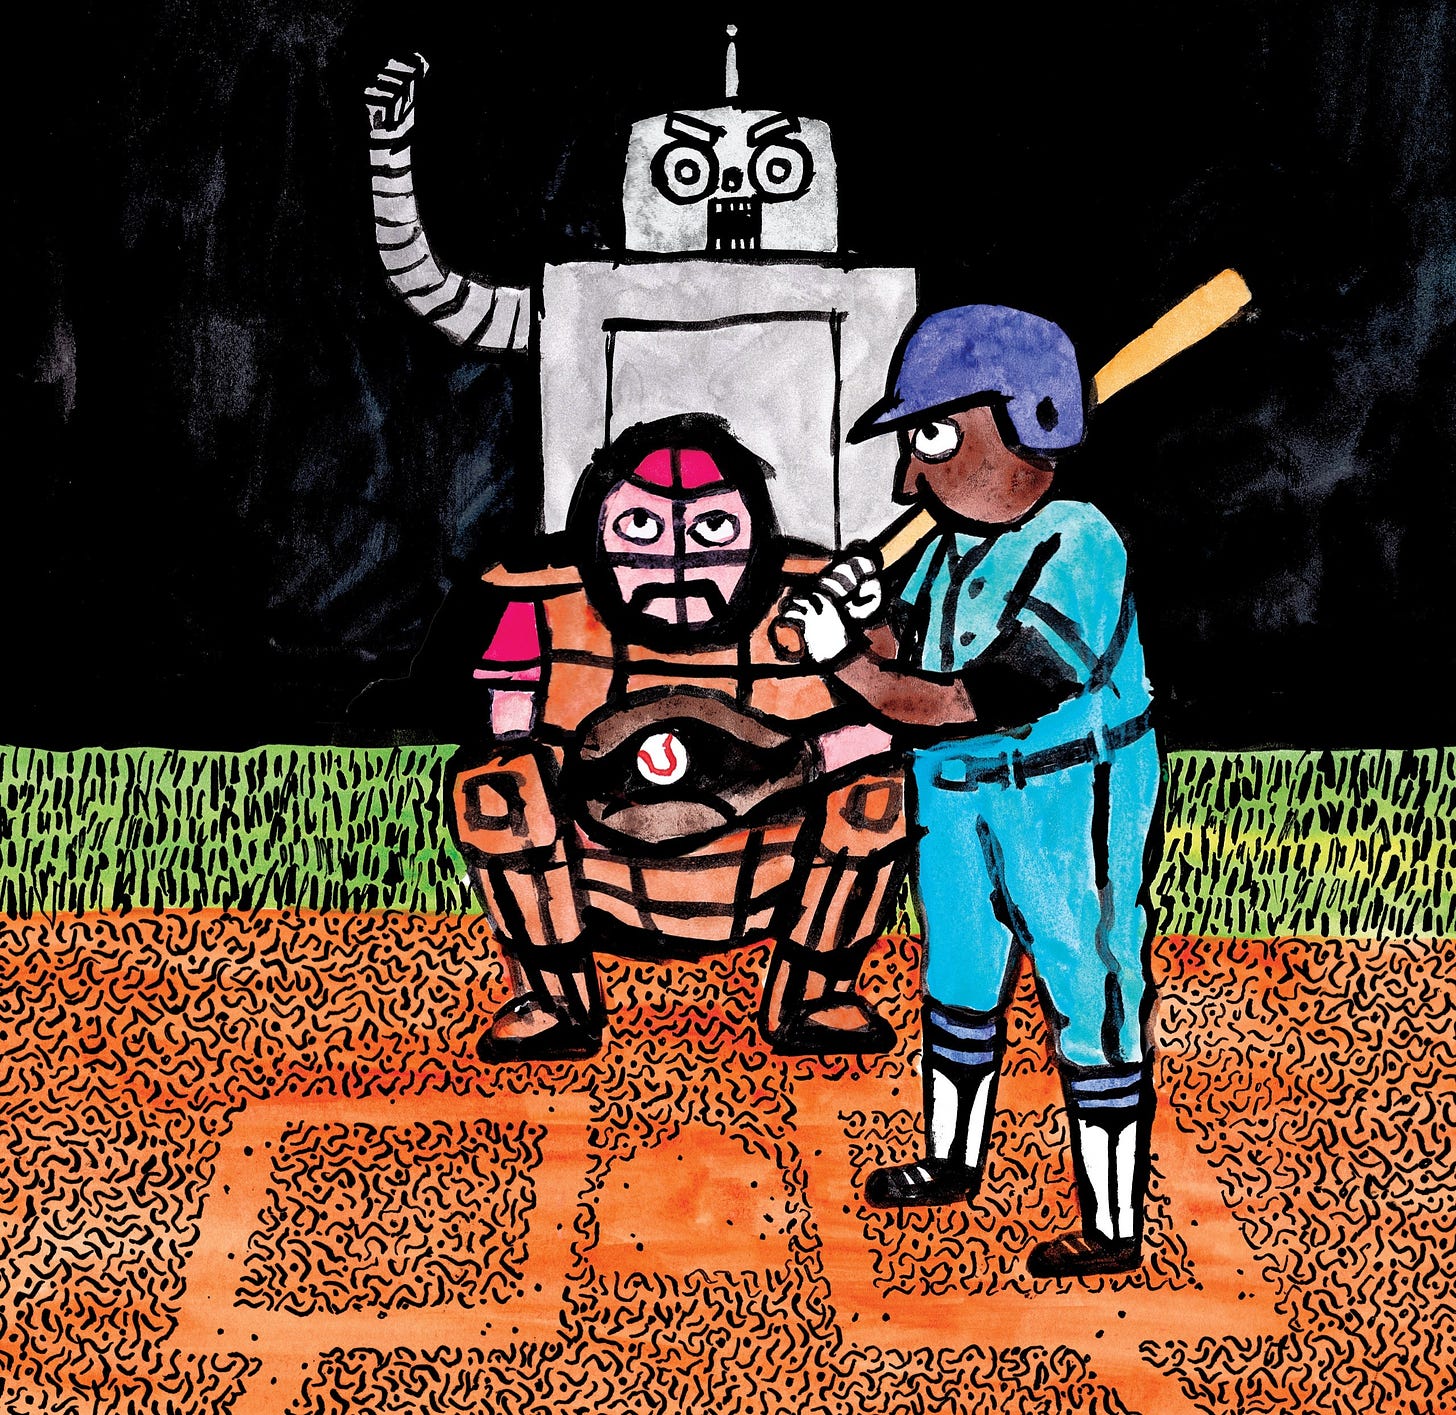 A robot replaces an Umpire in a game of baseball